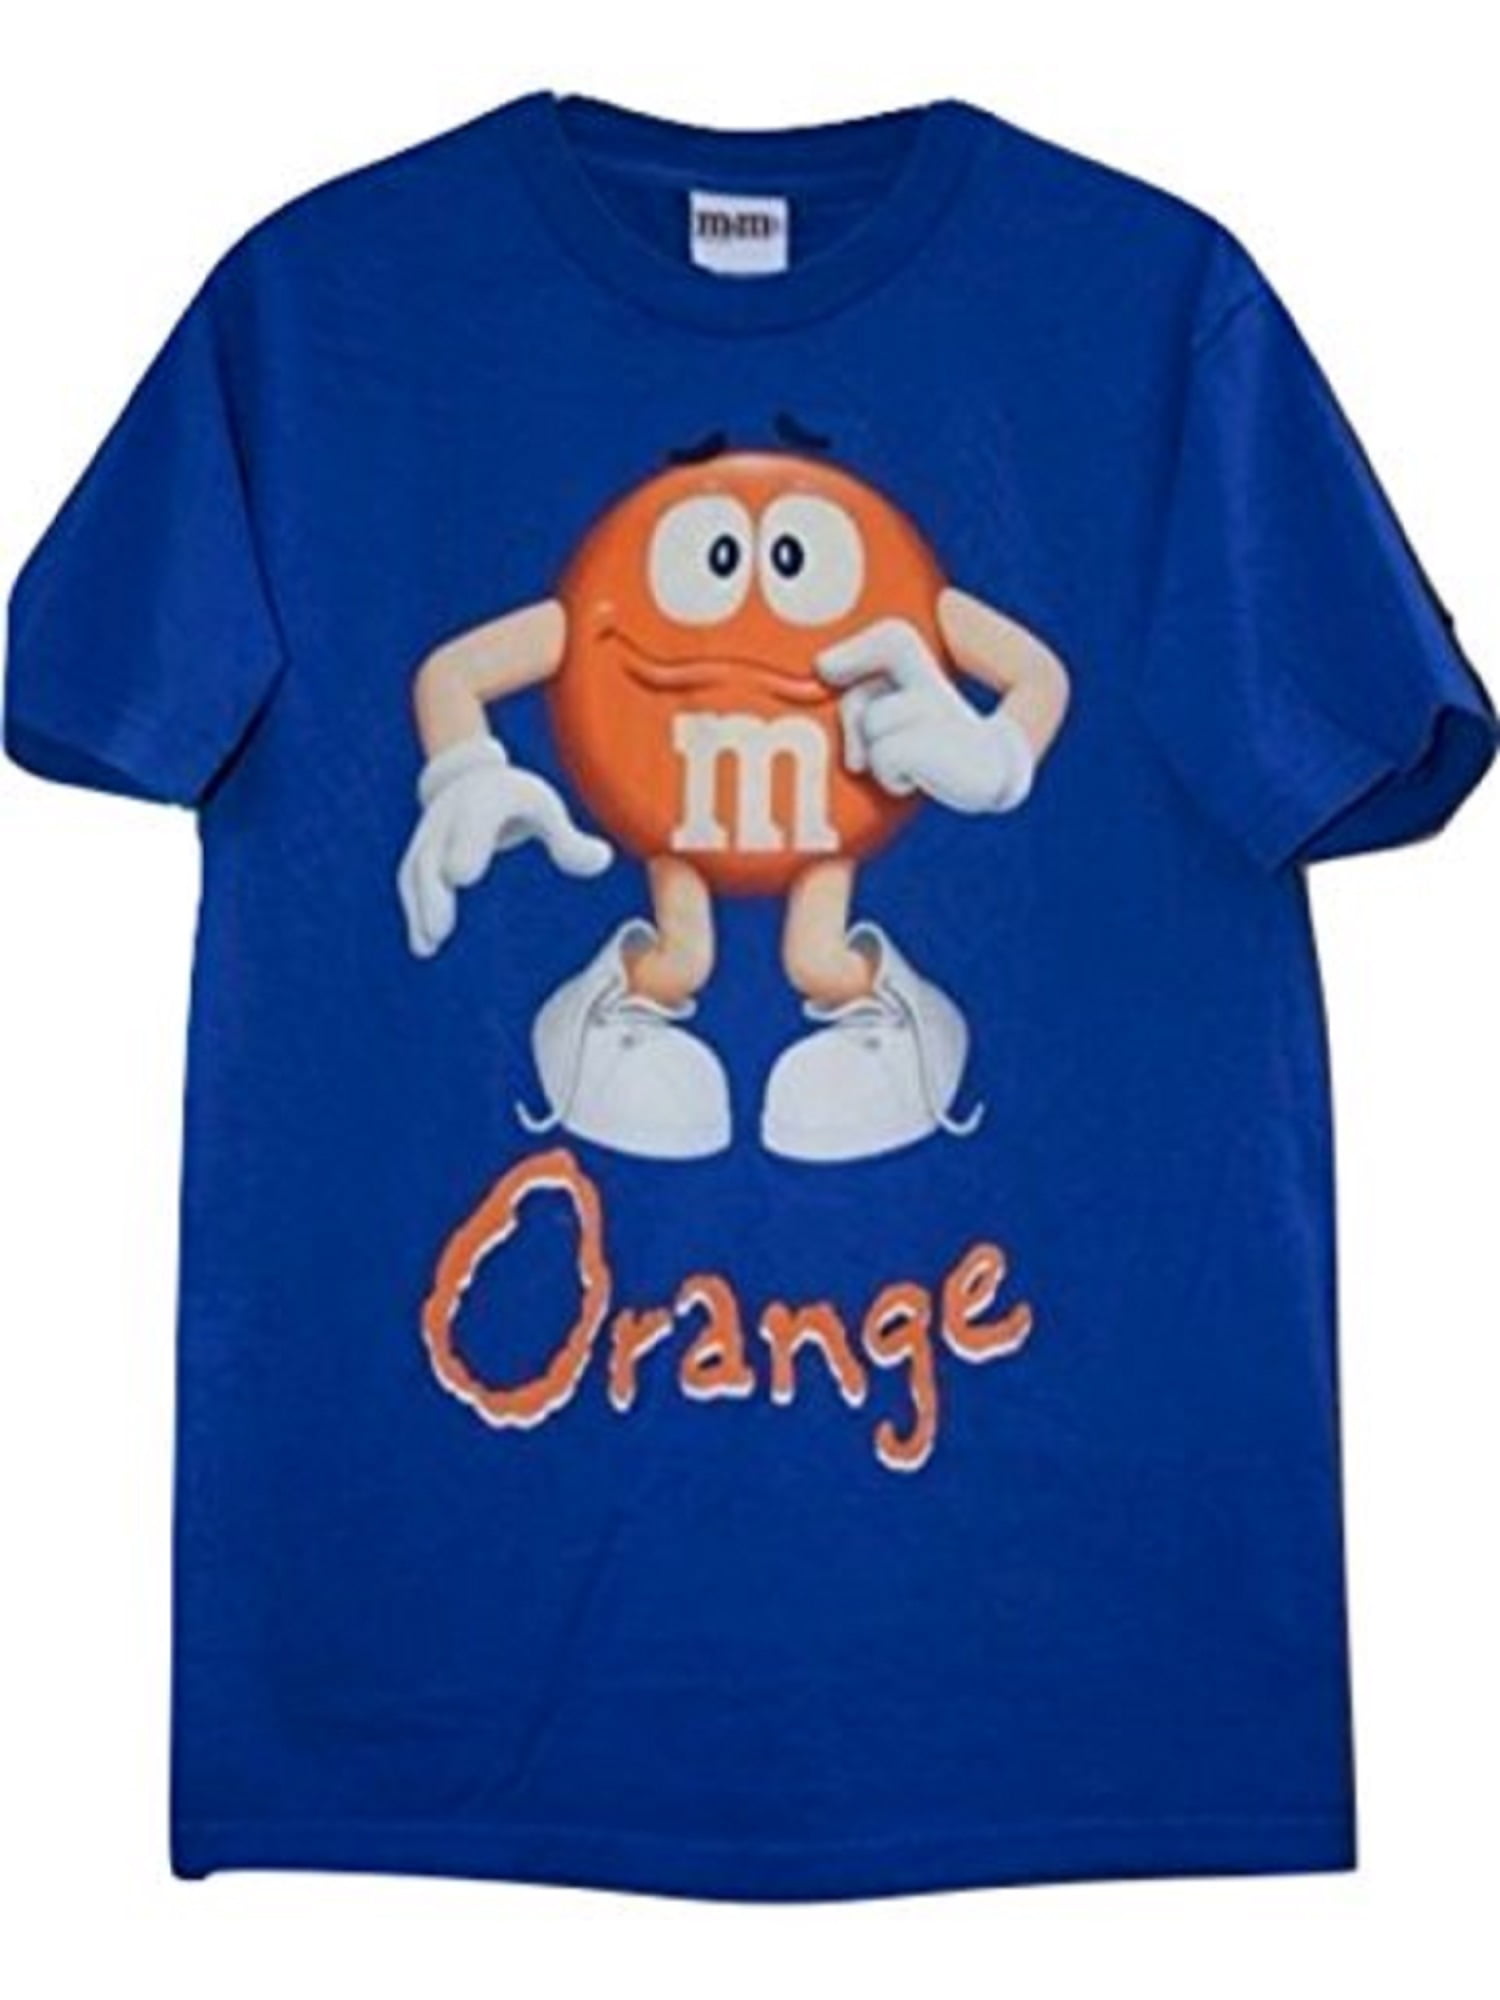 Juniors Womens M&M's Chocolate Candy Silly Character Face Orange T-Shirt Tee 